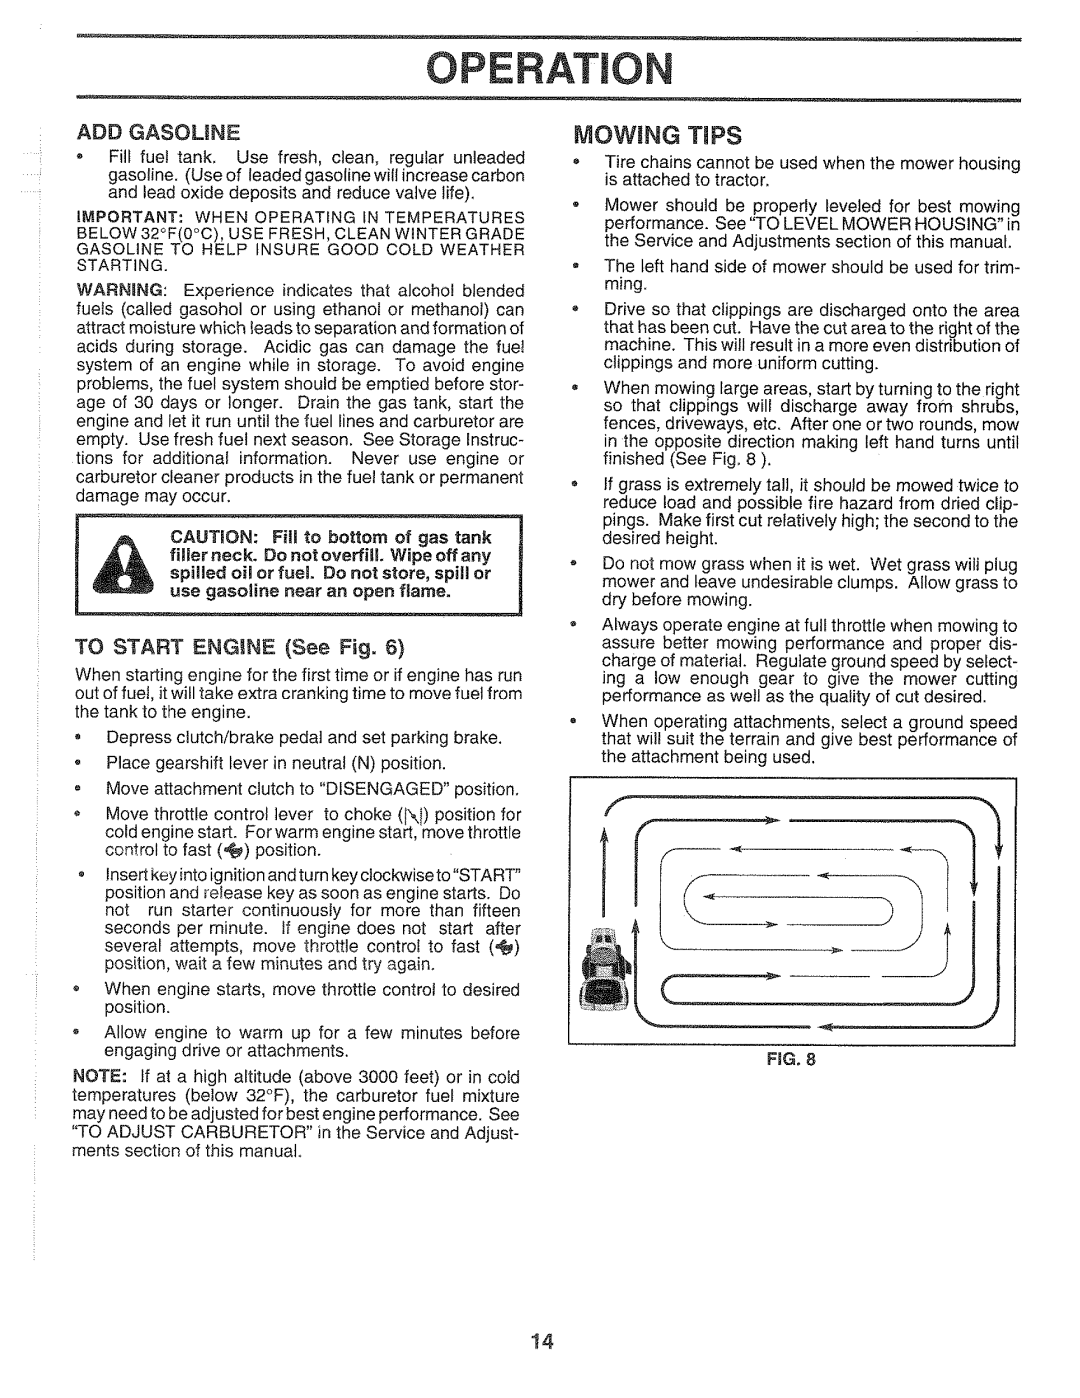 Sears 917.2565 manual MOWING TiPS, Add Gasoune, TO START ENG|NE See Fig, Wipeoffany, Do not, store, spill or, Operatbon 